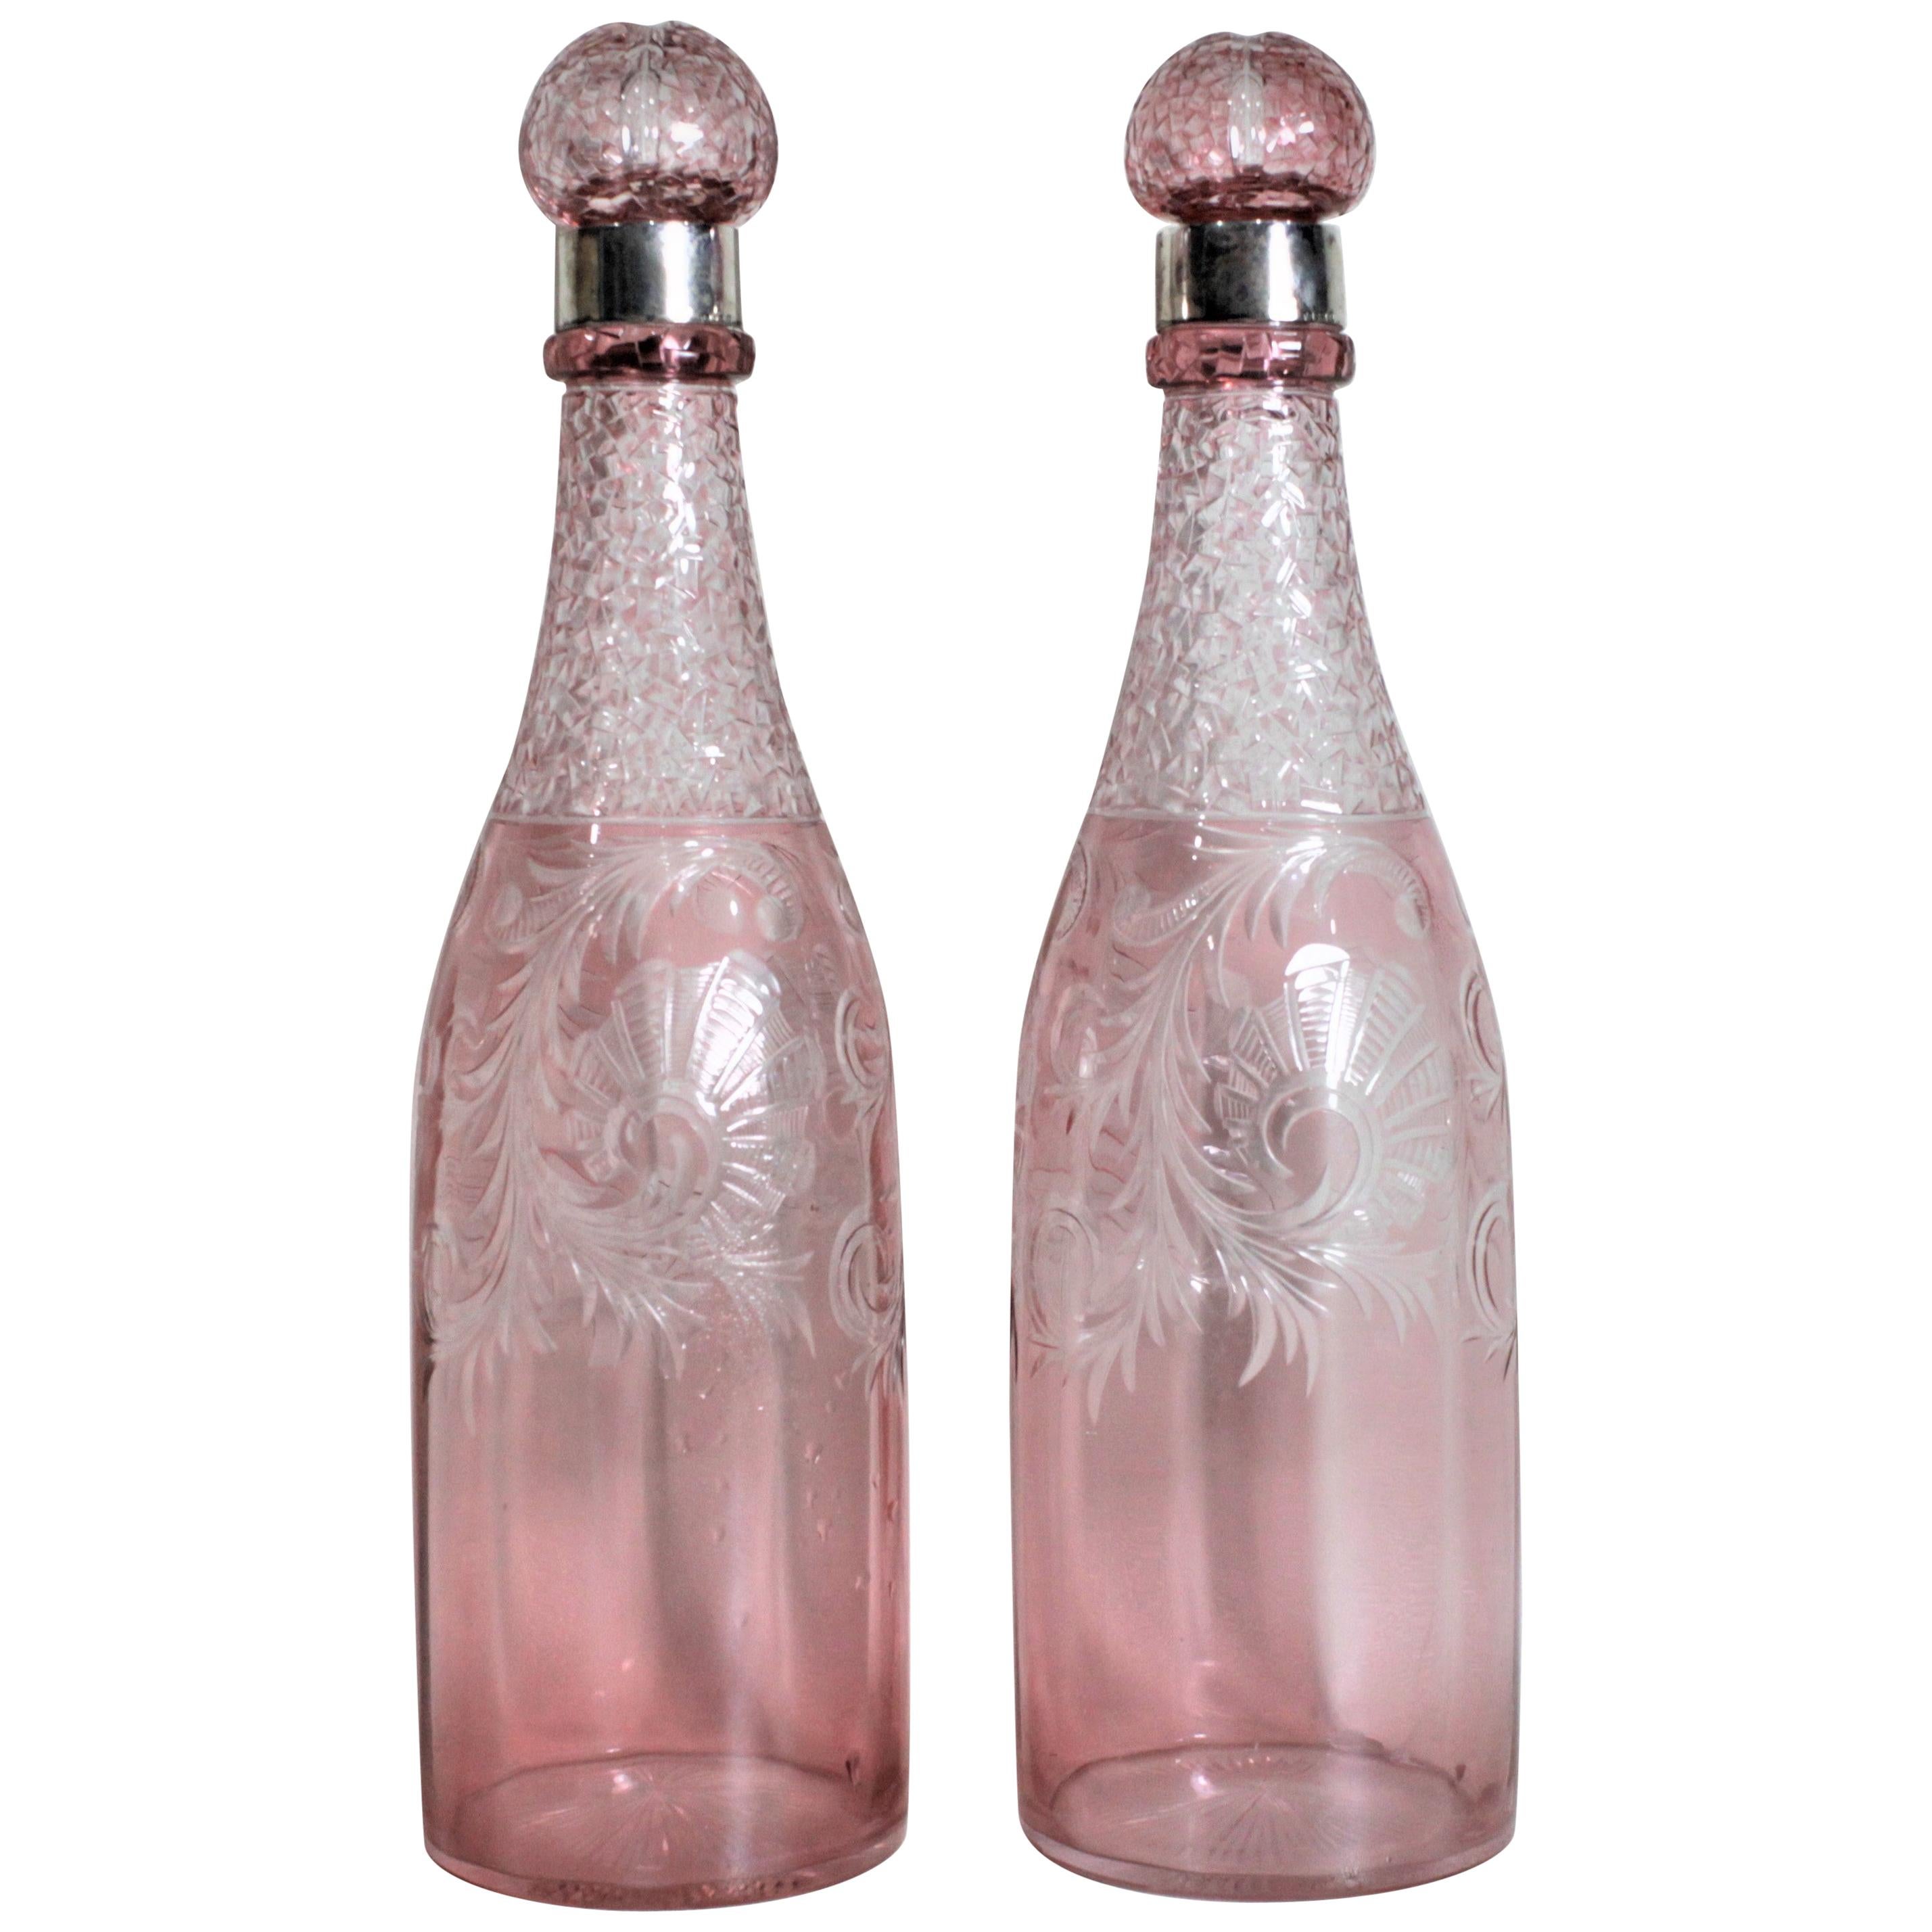 Pair of Antique Pink Cranberry Cut Glass Bottle Decanters with Sterling Rims